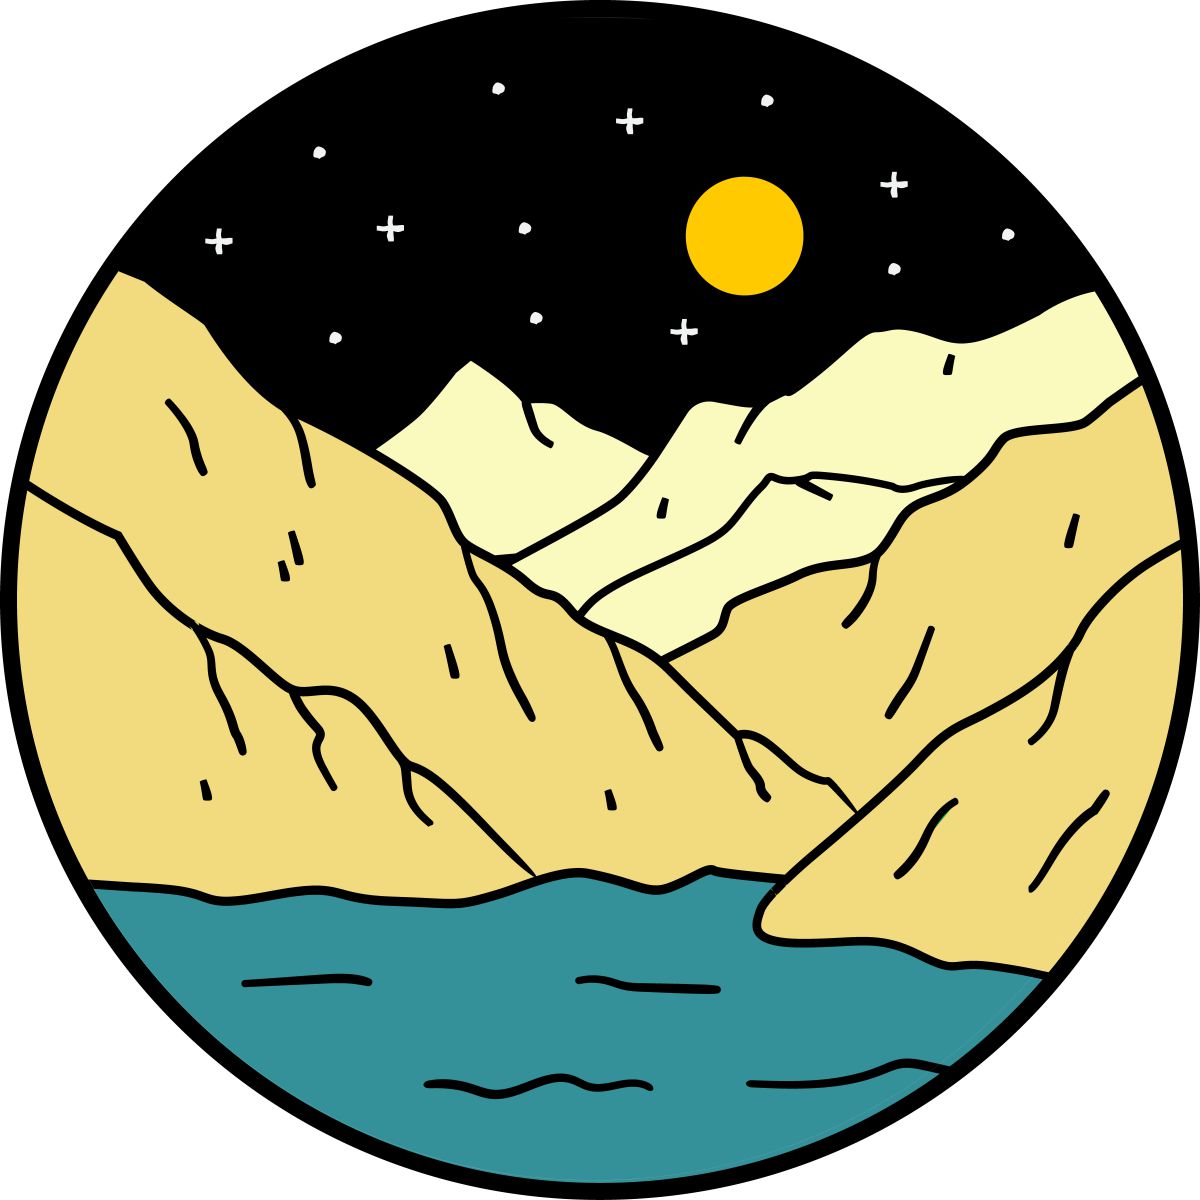 Graphic designed spare tire cover with mountains and water under the dark starry moonlit sky.